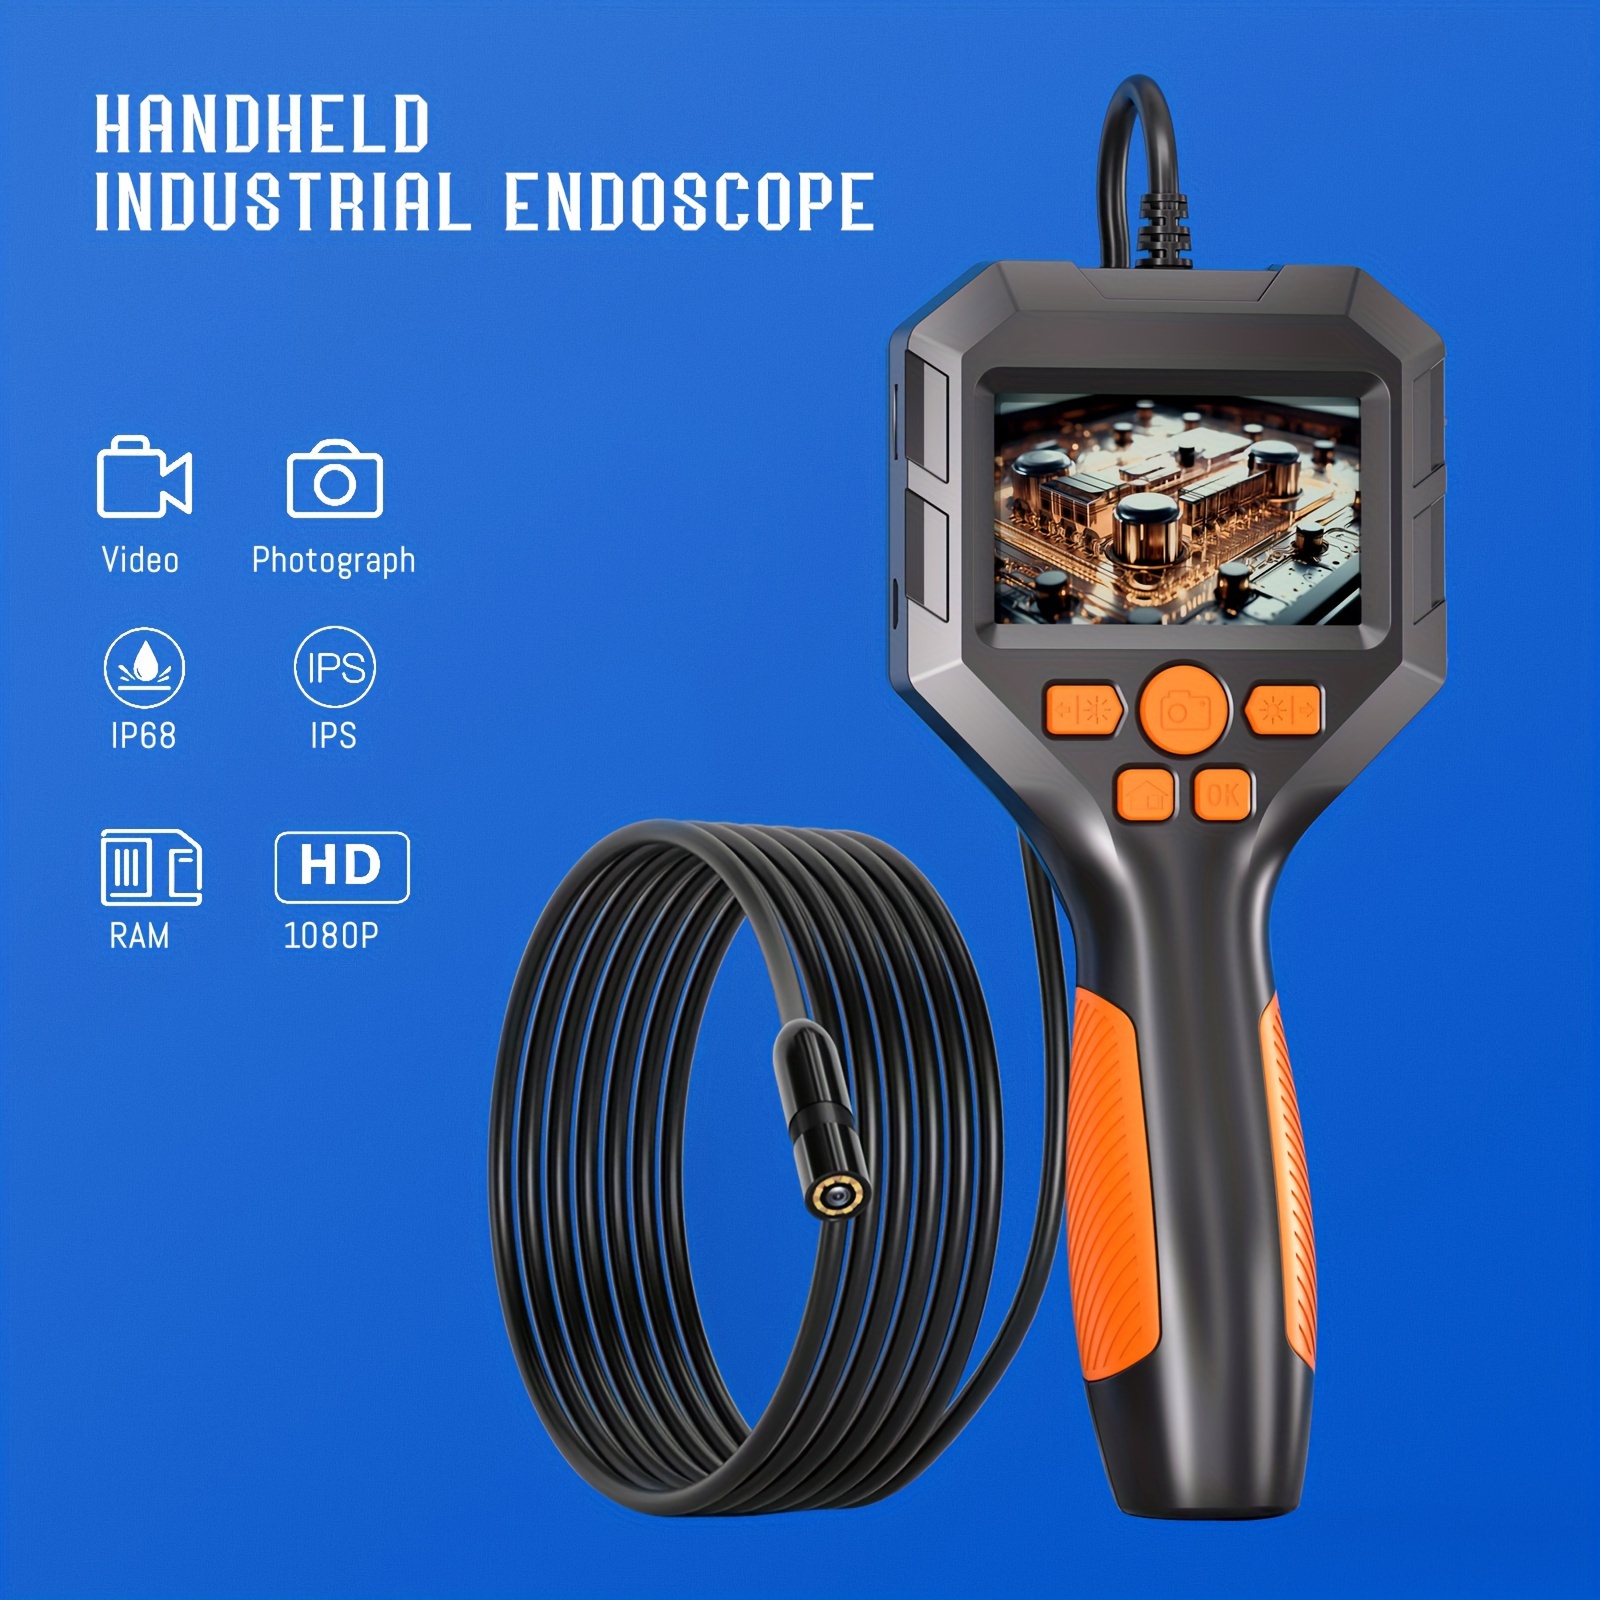 5.5mm Endoscope Camera with Light, Teslong Mechanic Borescope Inspection  Camera with Monitor, Flexible Snake Probe Camera, Fiber Optic Scope for